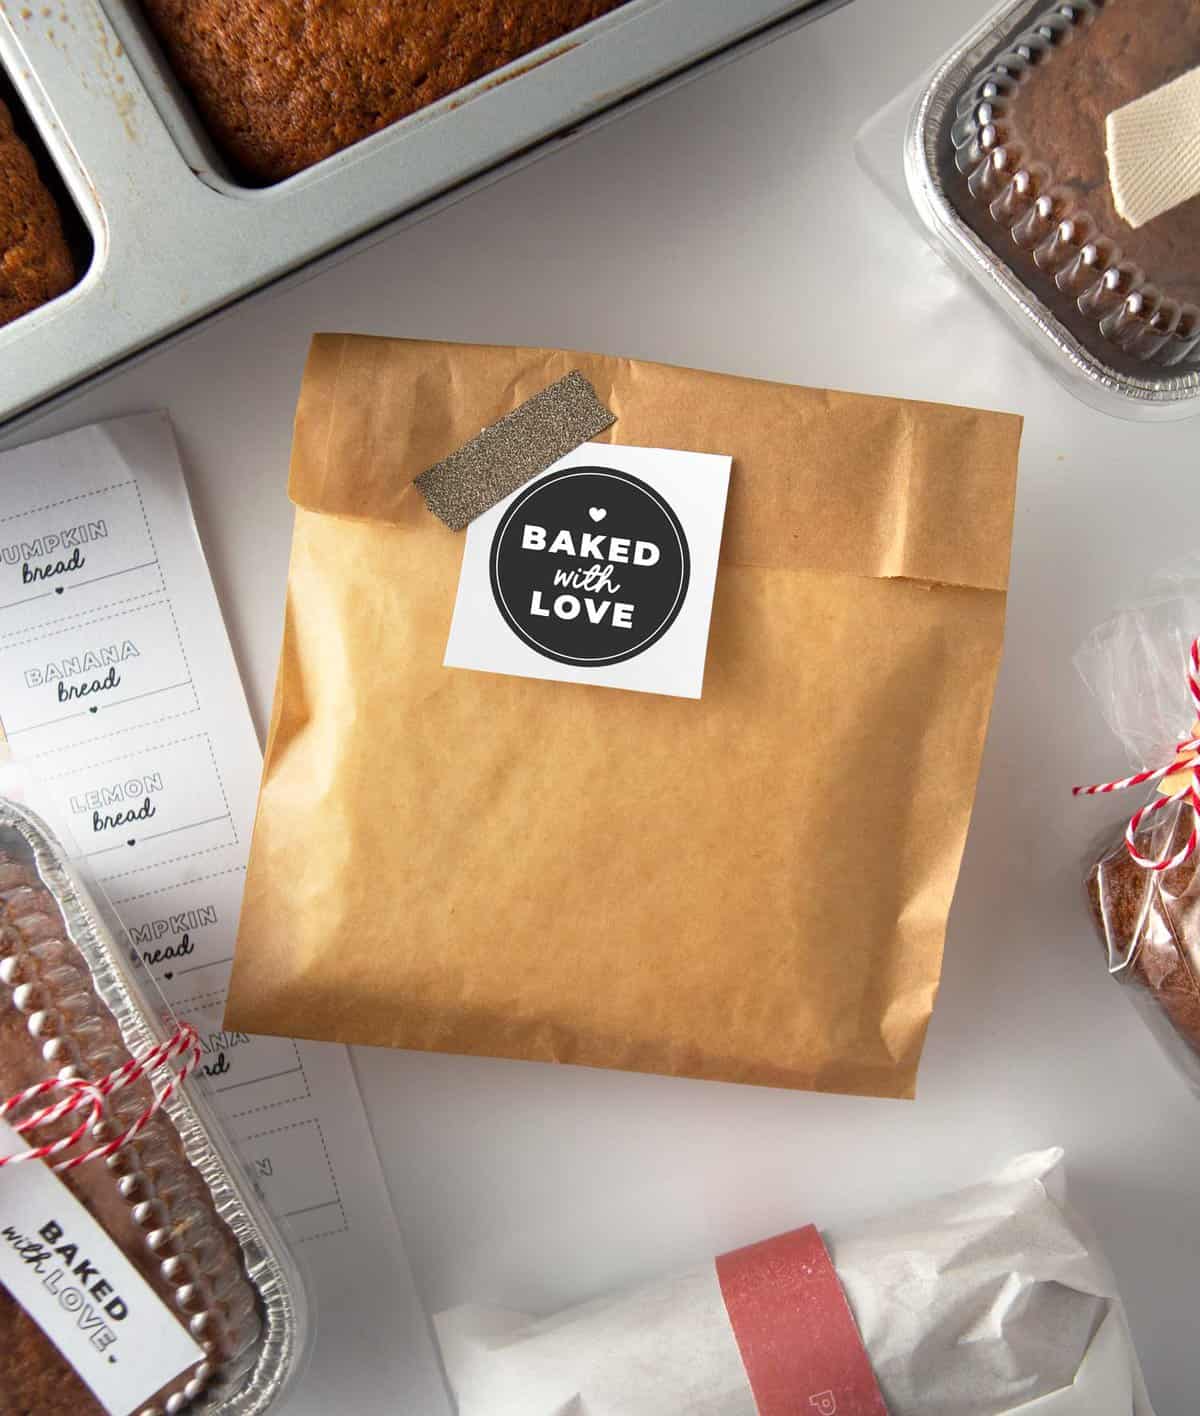 slice of banana bread in food safe pouch with "baked with love" gift tag 